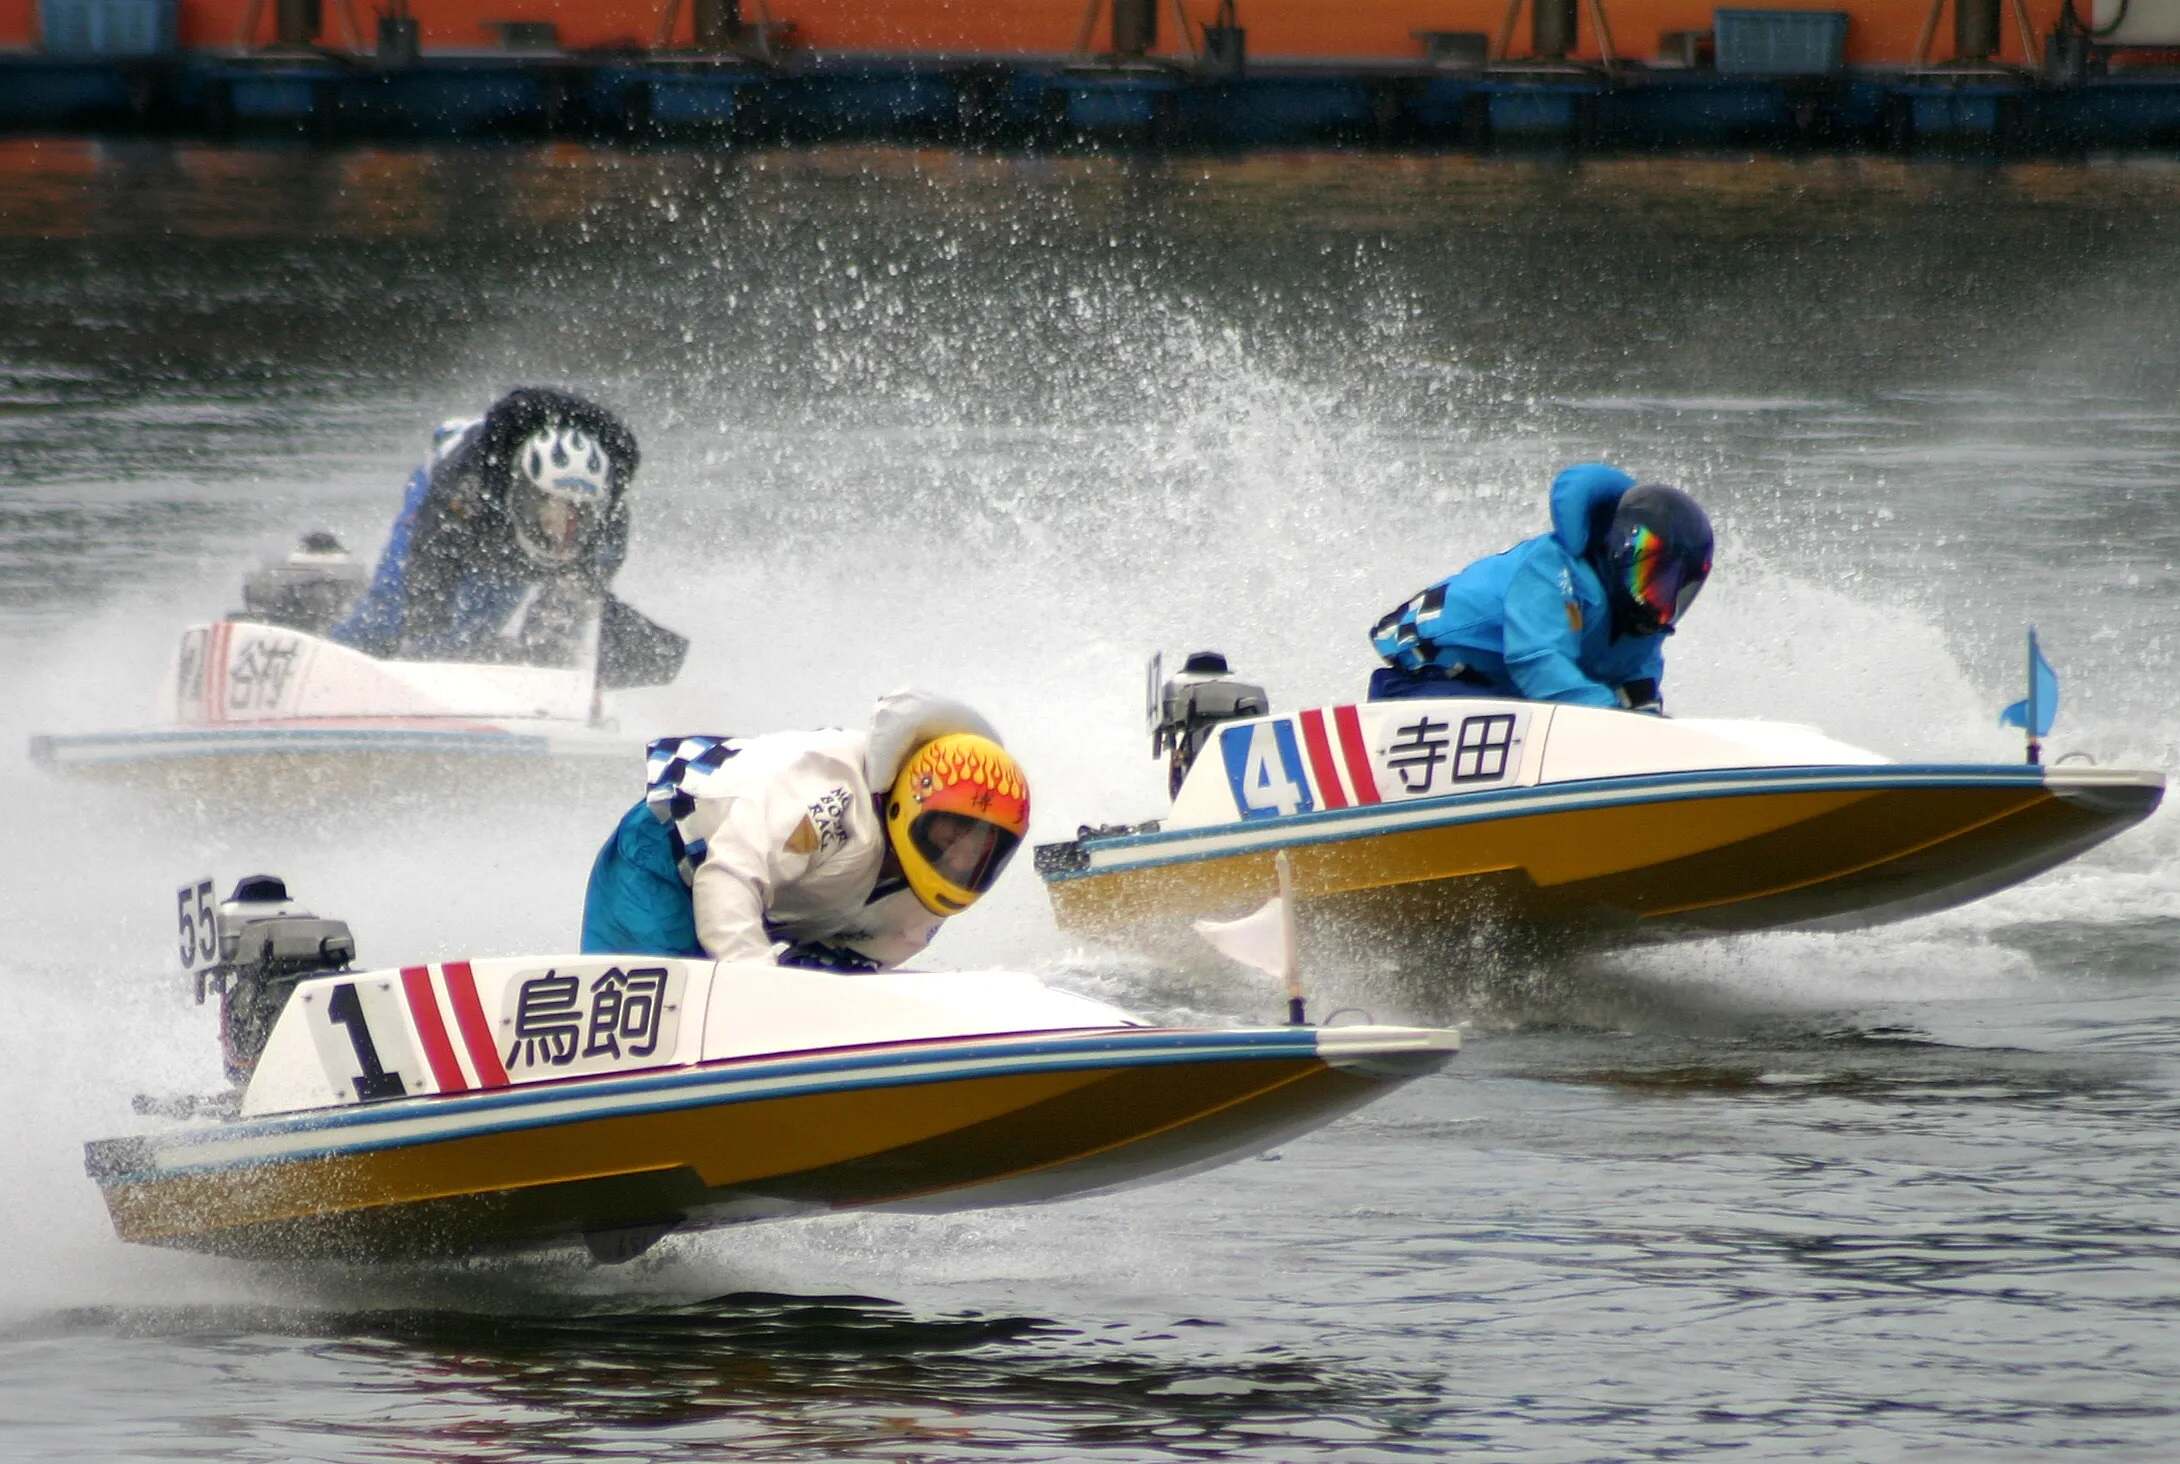 10-facts-you-must-know-about-speedboat-racing